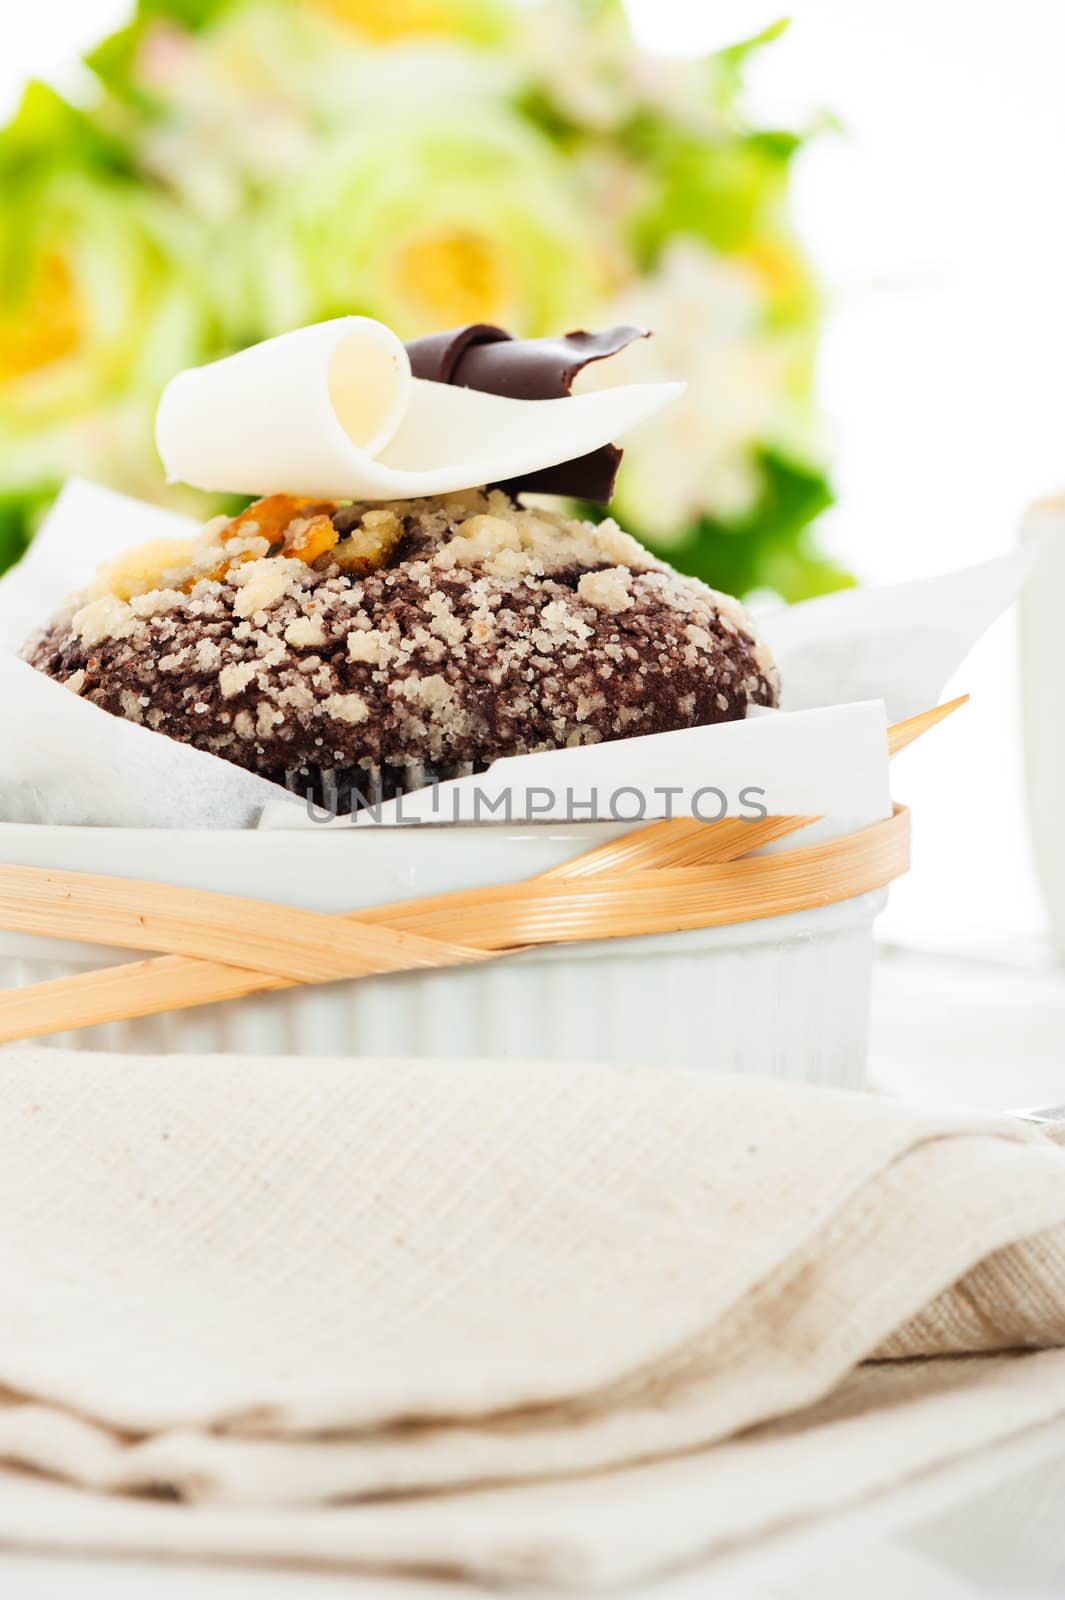 Chocolate muffin with white and dark chocolate on the top and flower as decoration in the background